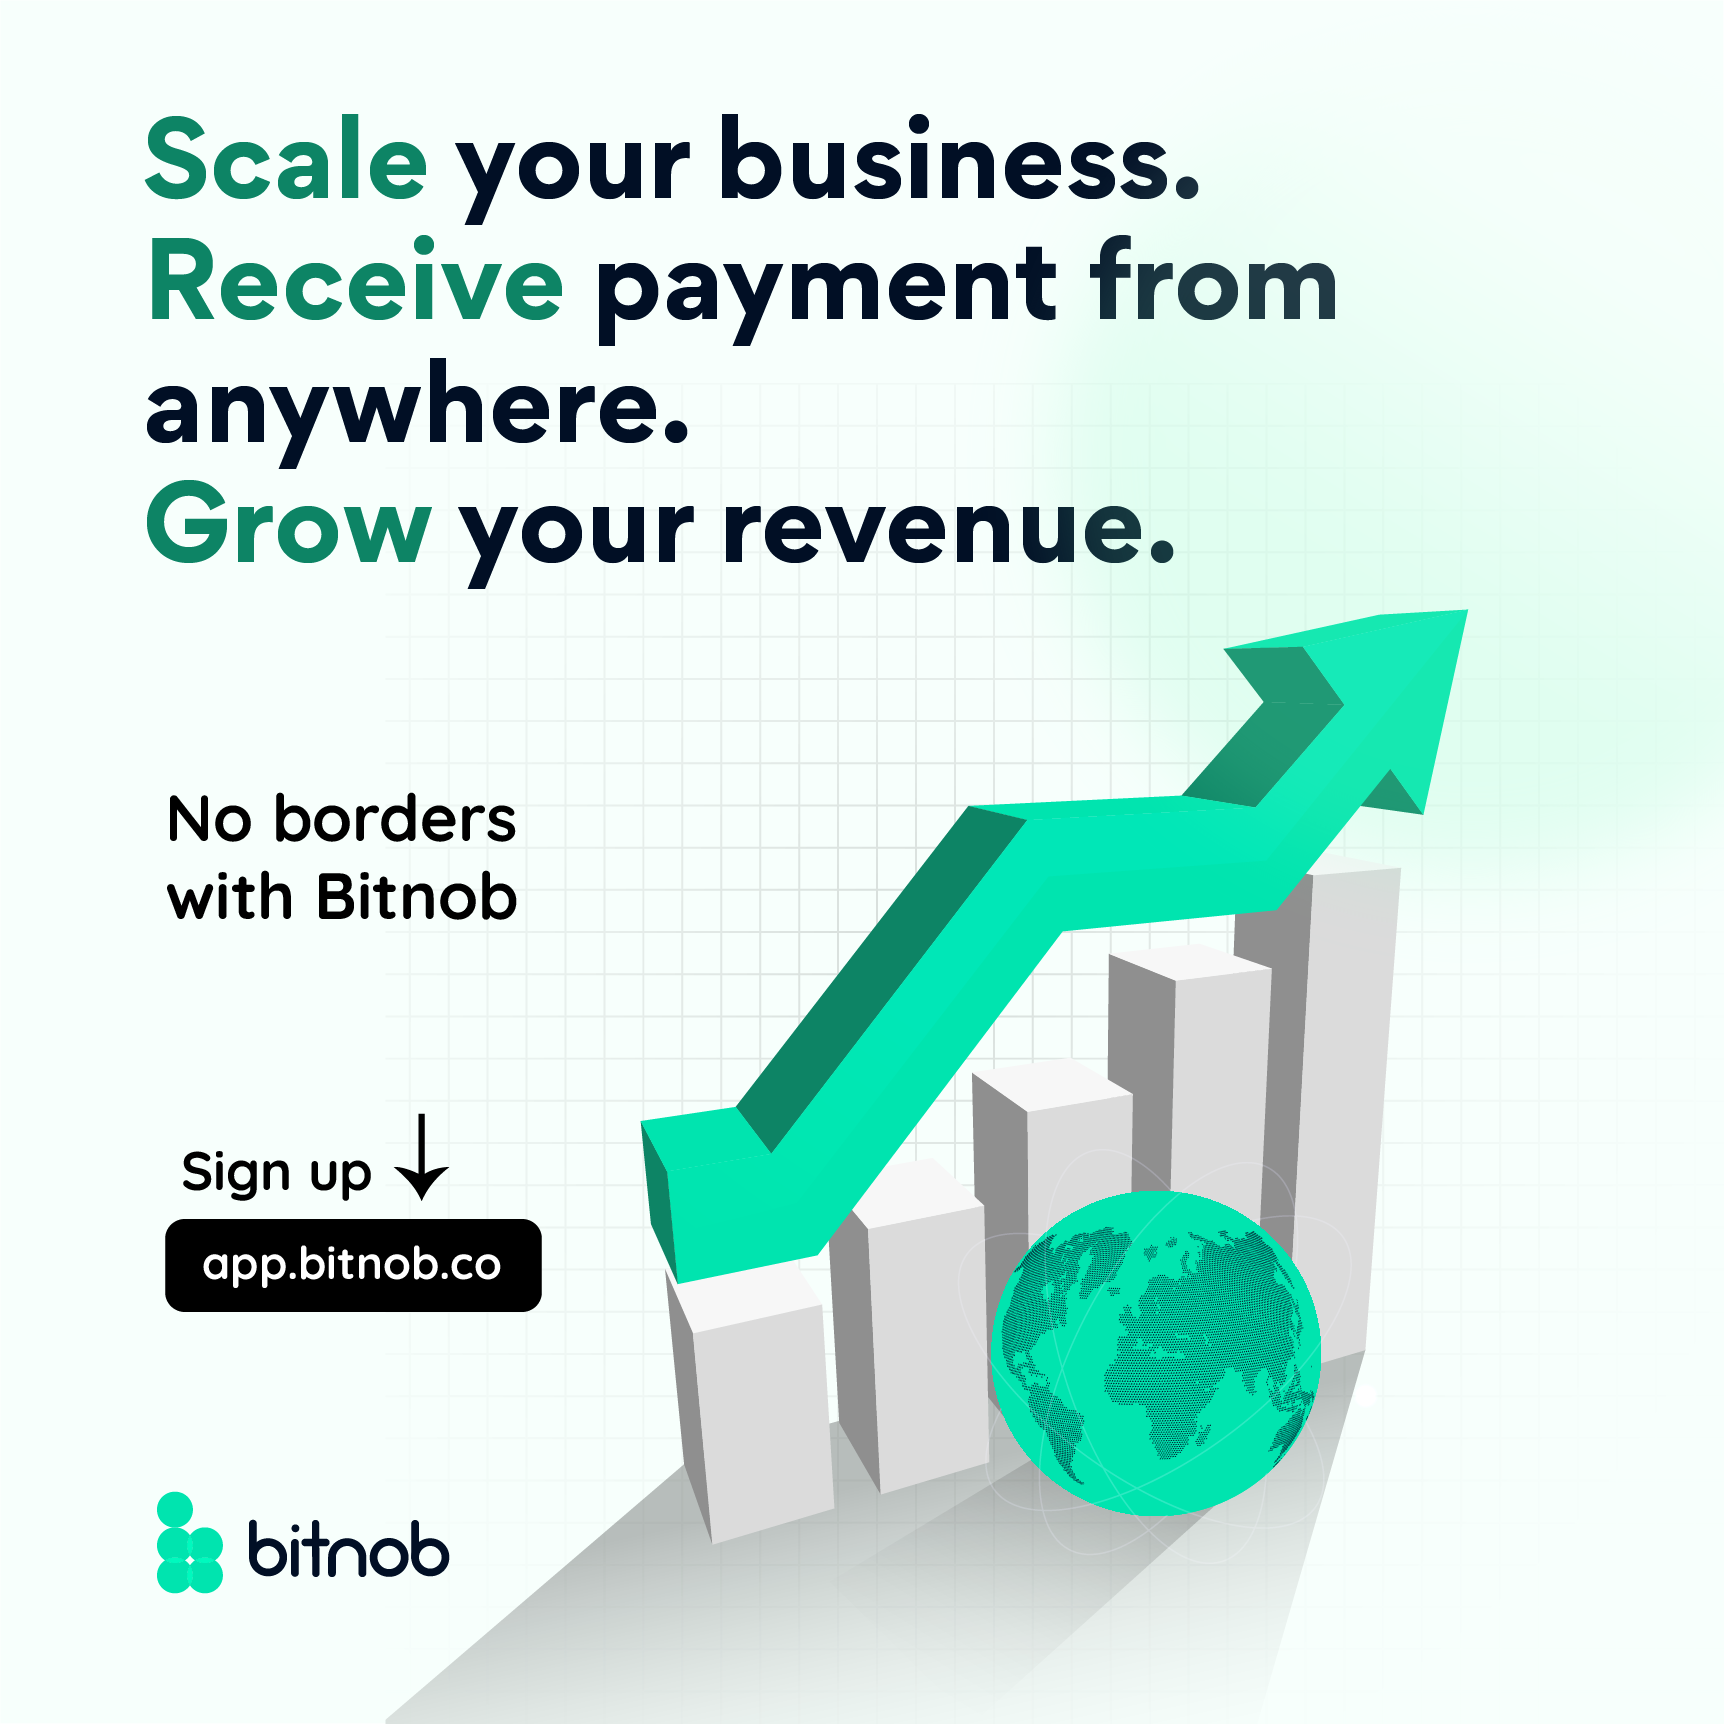 Bitnob launches its APIs and bitcoin infrastructure to enable businesses to scale